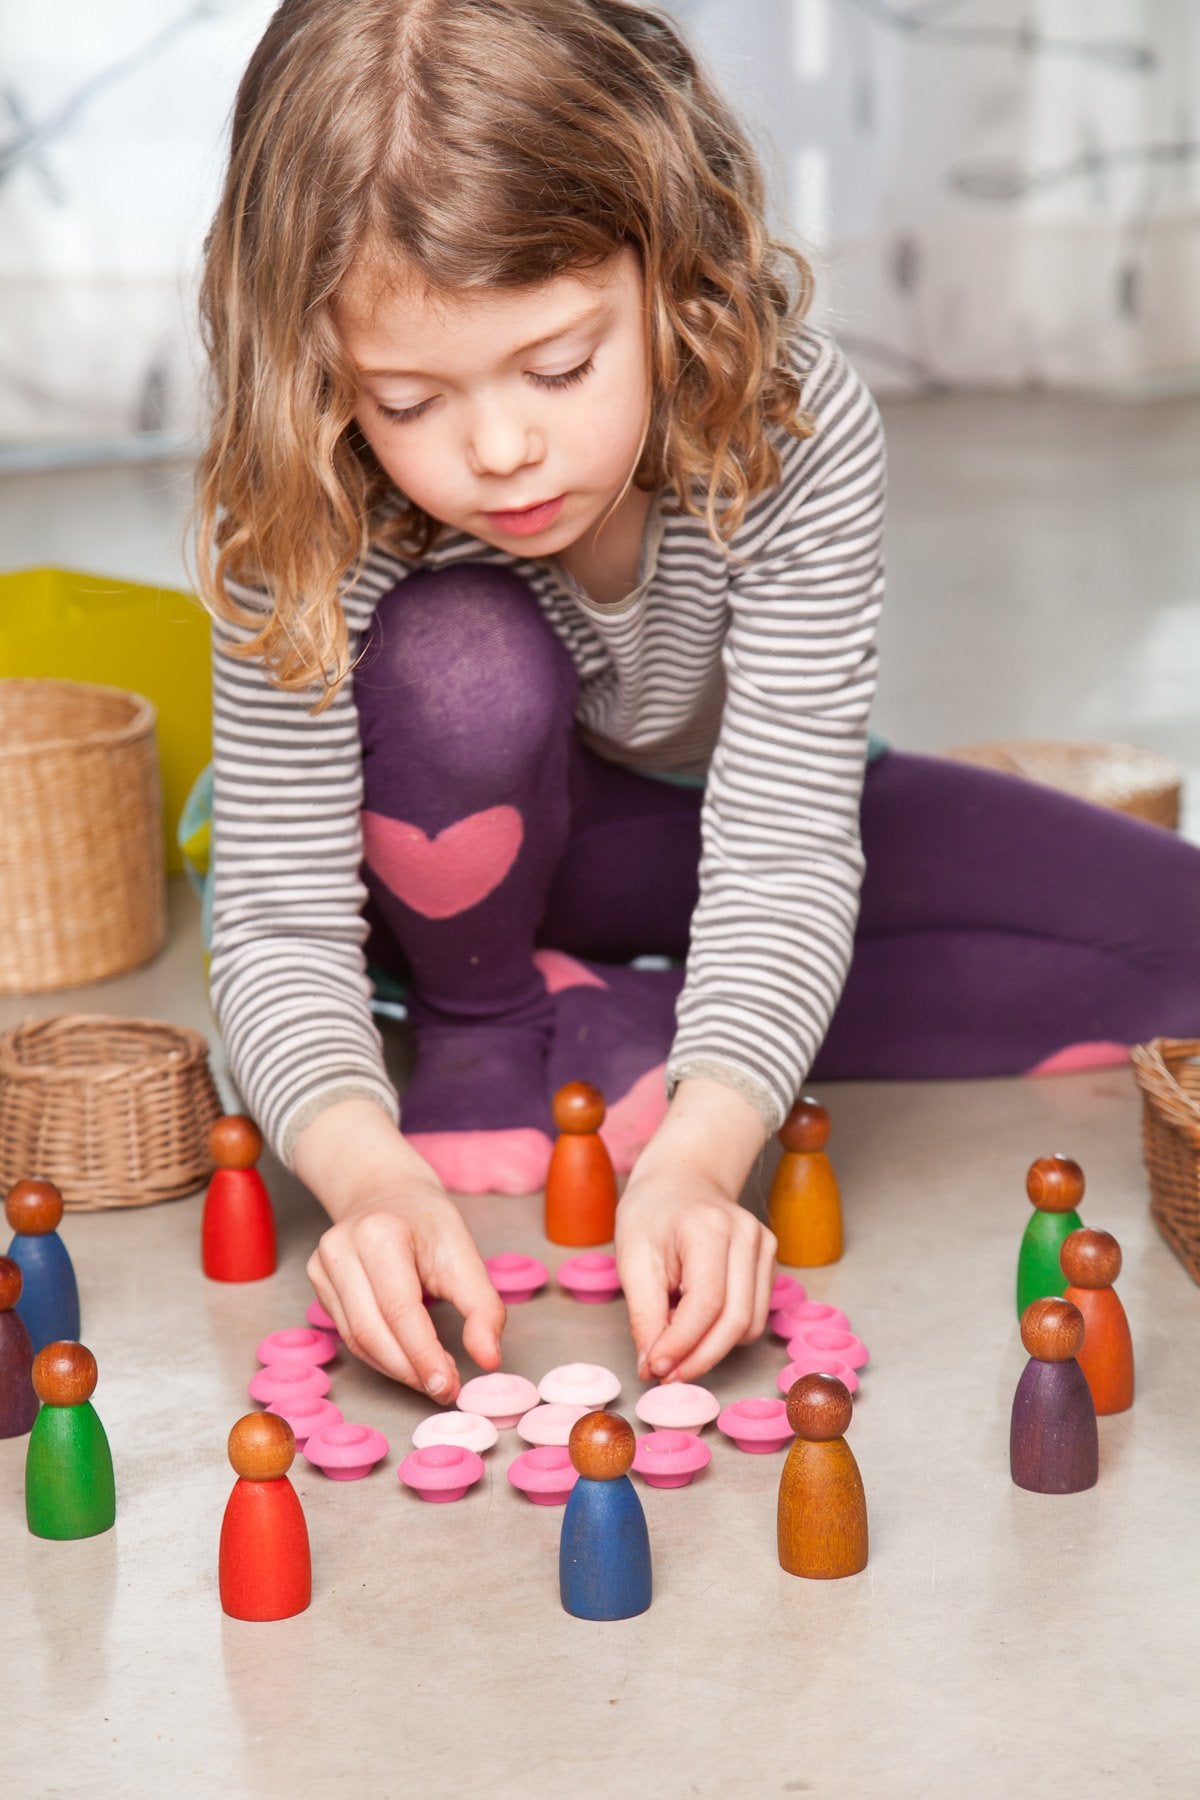 A child playing on the floor with colorful peg people, straw baskets, and a pink wooden flower mandala